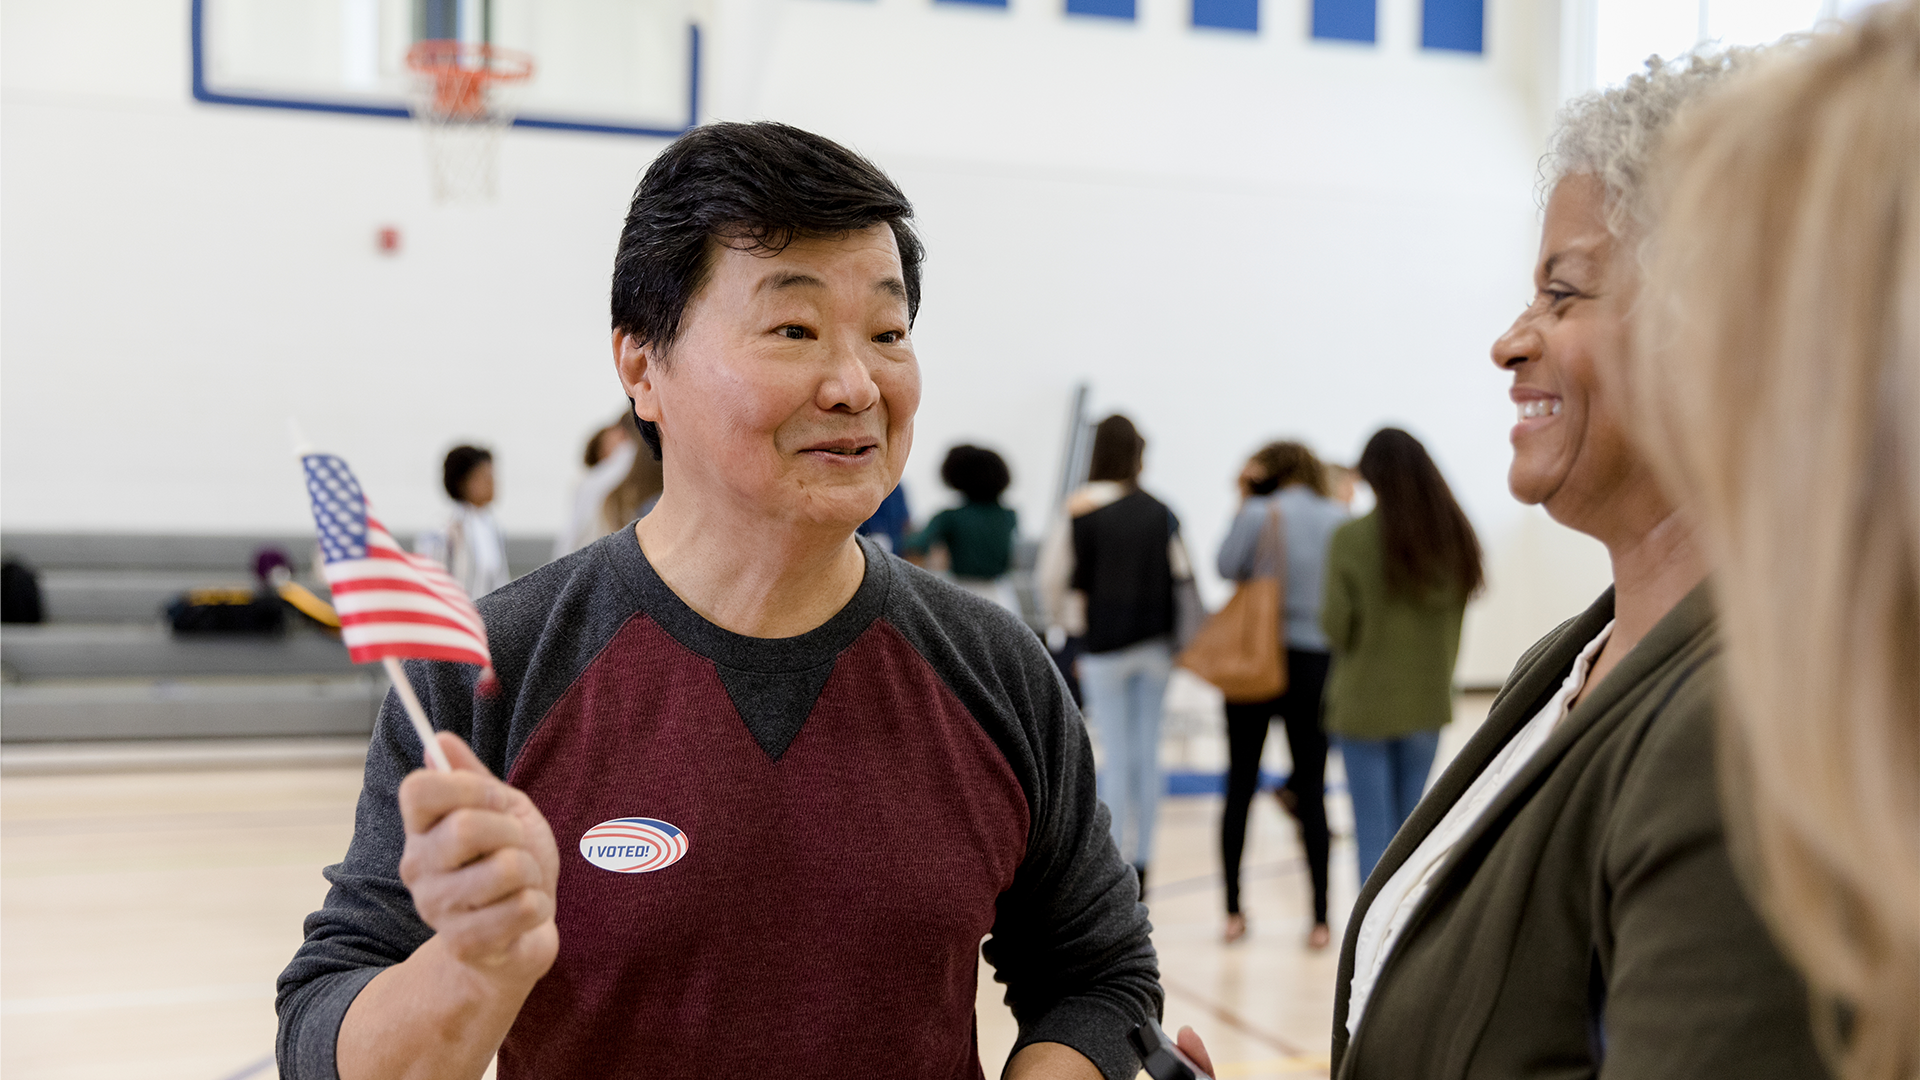 Man with an American flag talking to women at a voting center